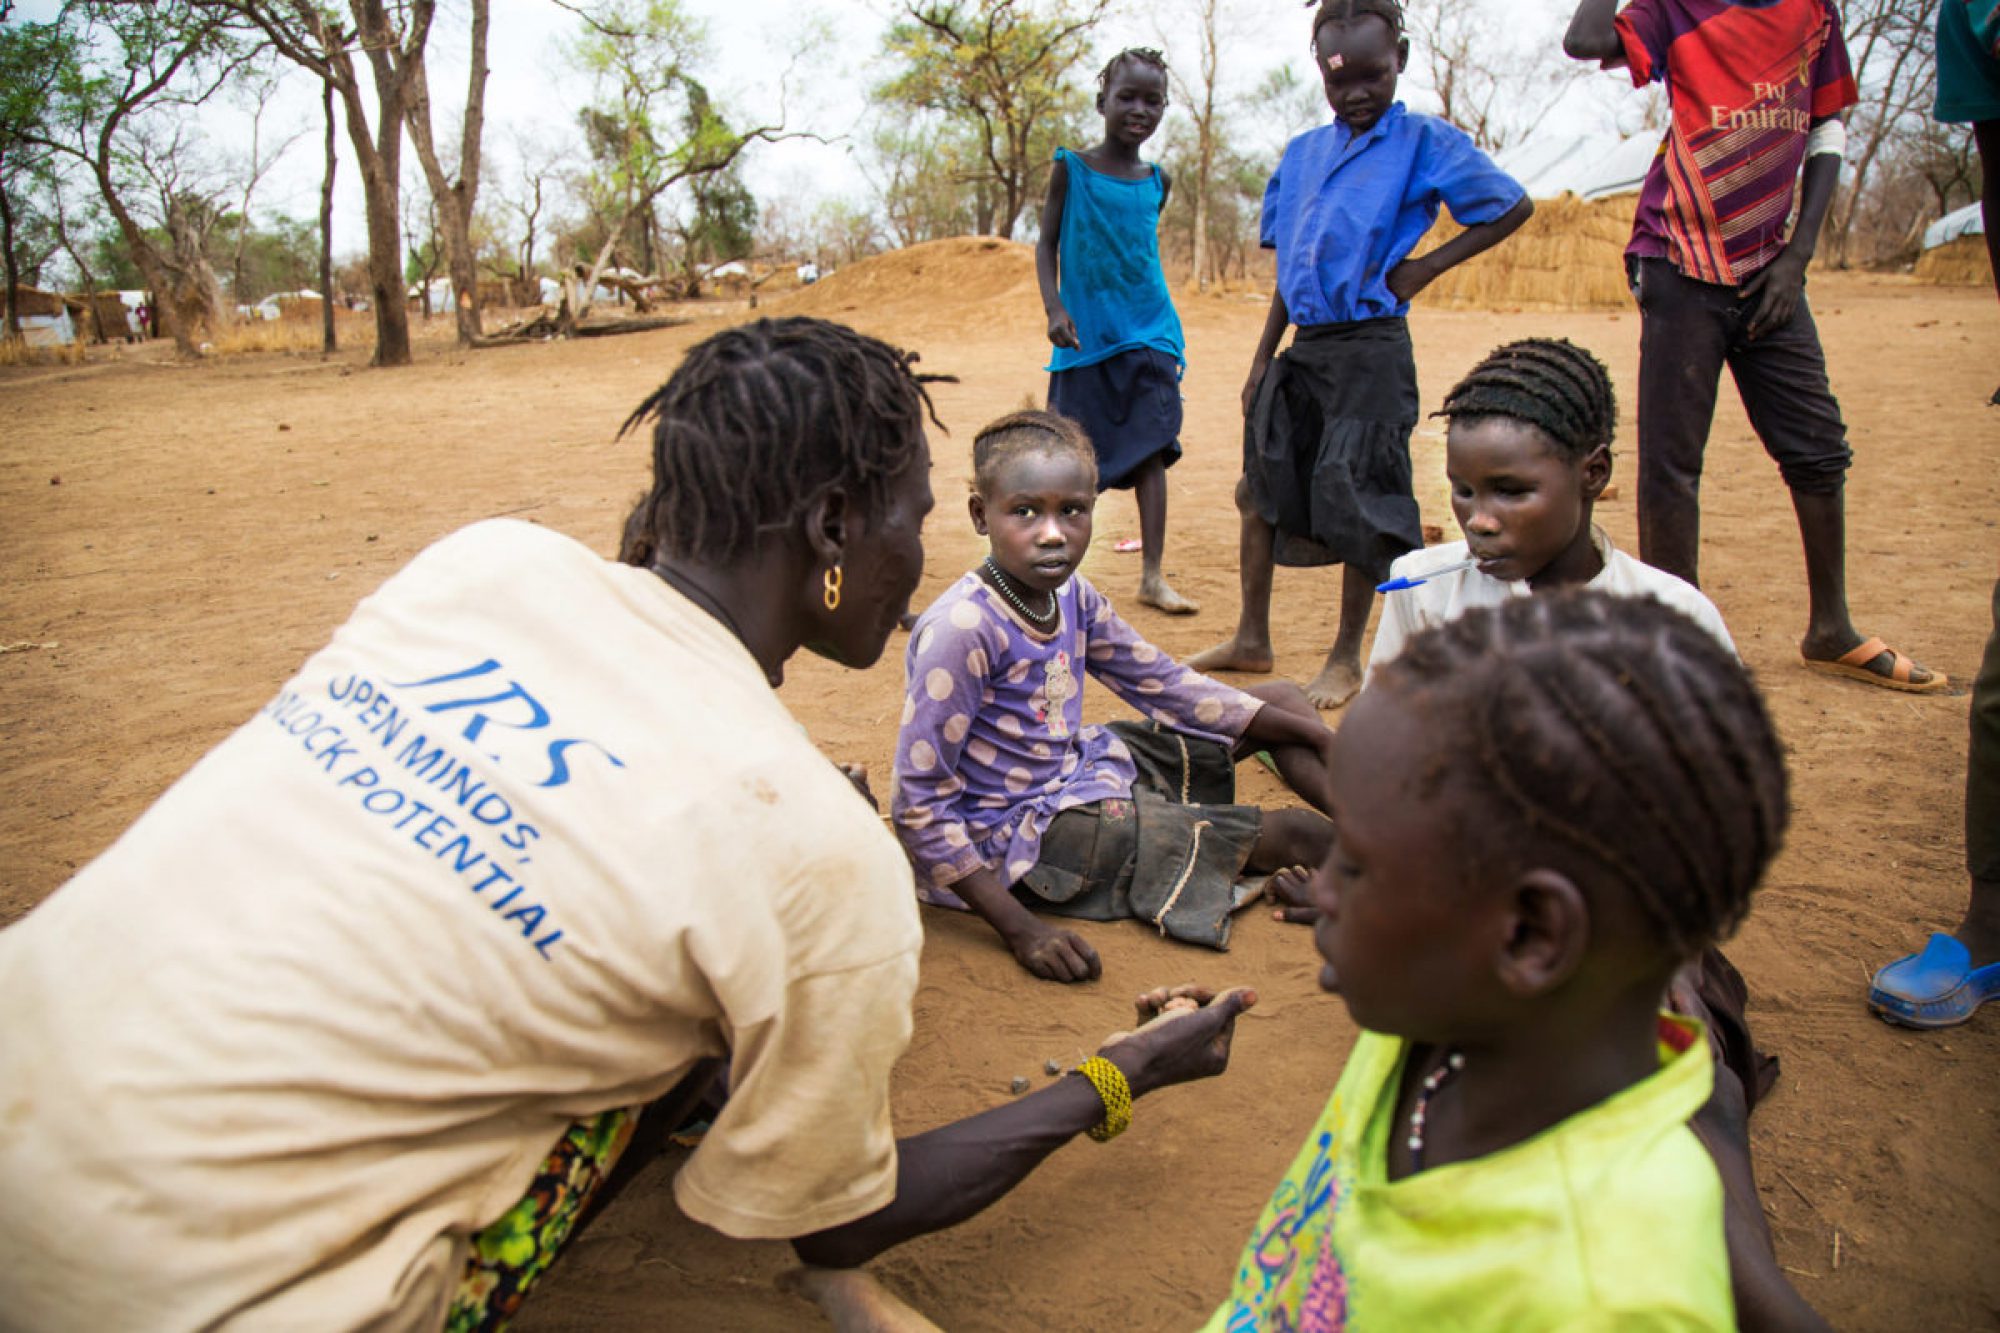 Children play during a break at the Offra school, in Maban, South Sudan.